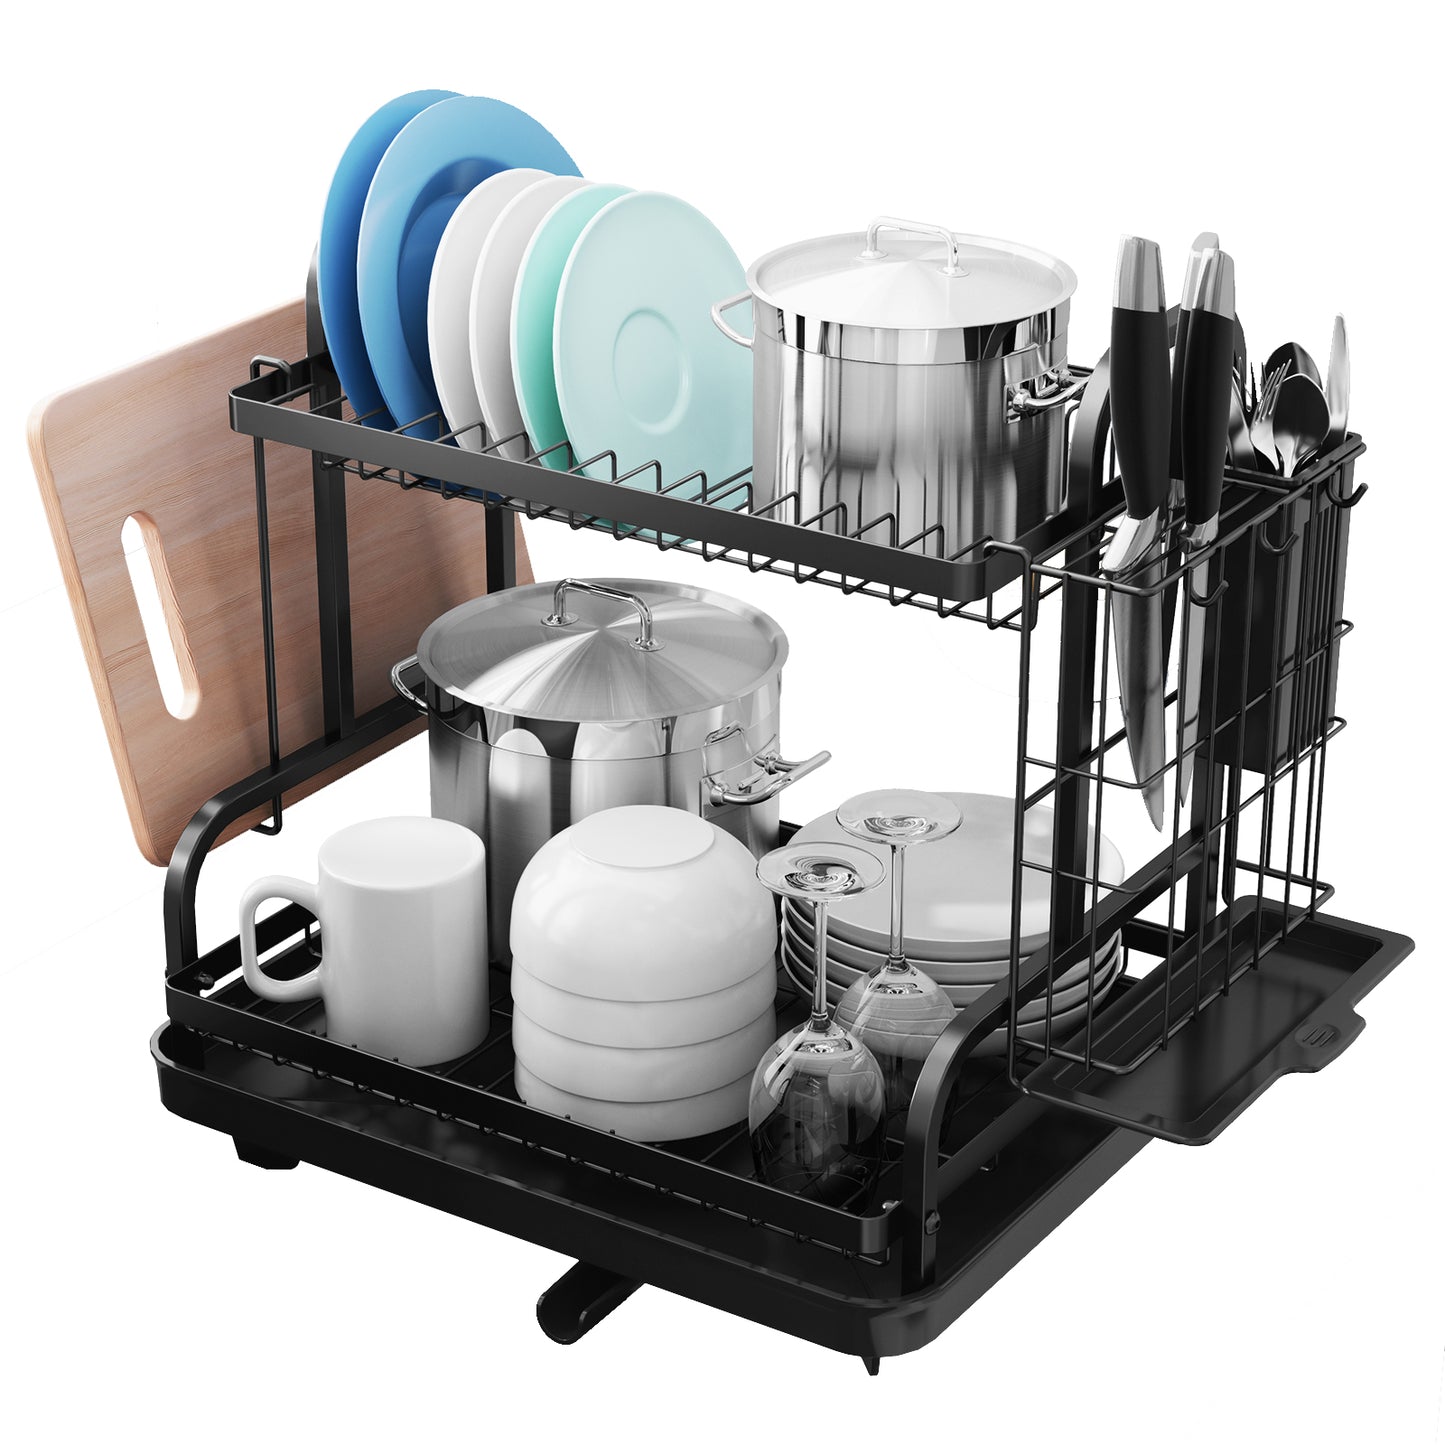 Kitsure Dish Rack, 2-Tier Dish Drying Rack with Large Capacity,  Multifunctional Dish Drying Rack with Drainboard, Rustproof & Durable Dish  Rack and Drainboard Set with Easy Installation 